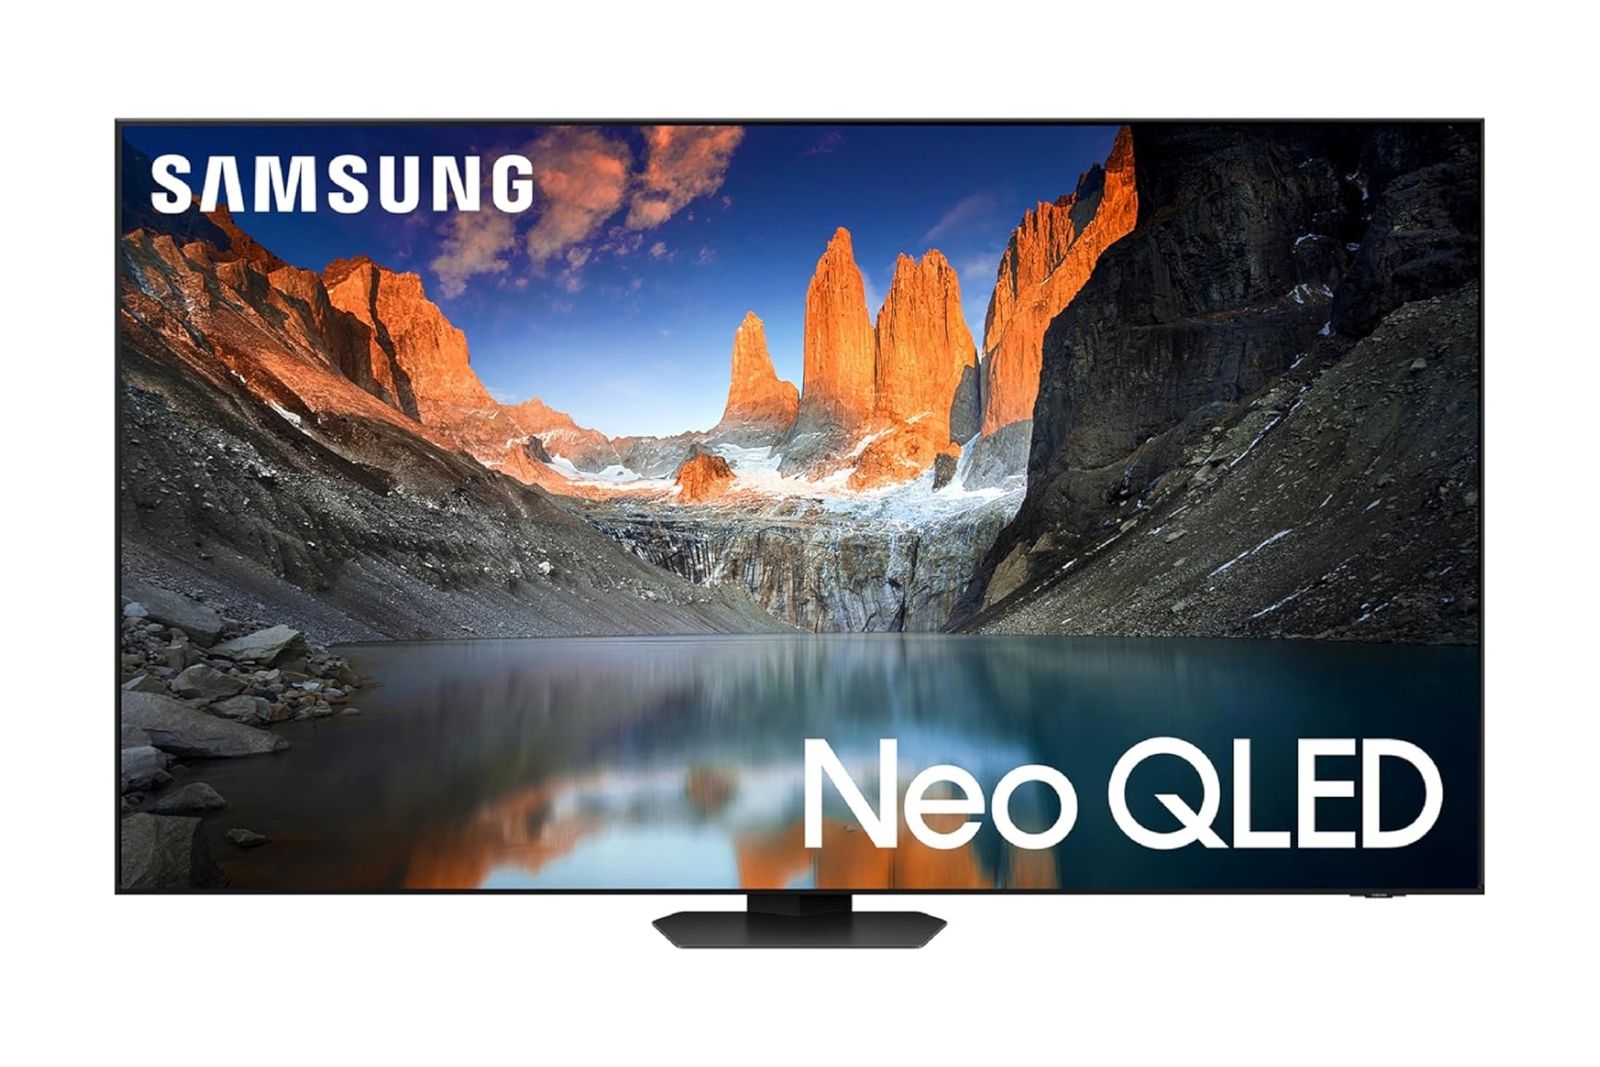 Samsung's Neo QLED 4K TV viewed from the front with a small black stand.